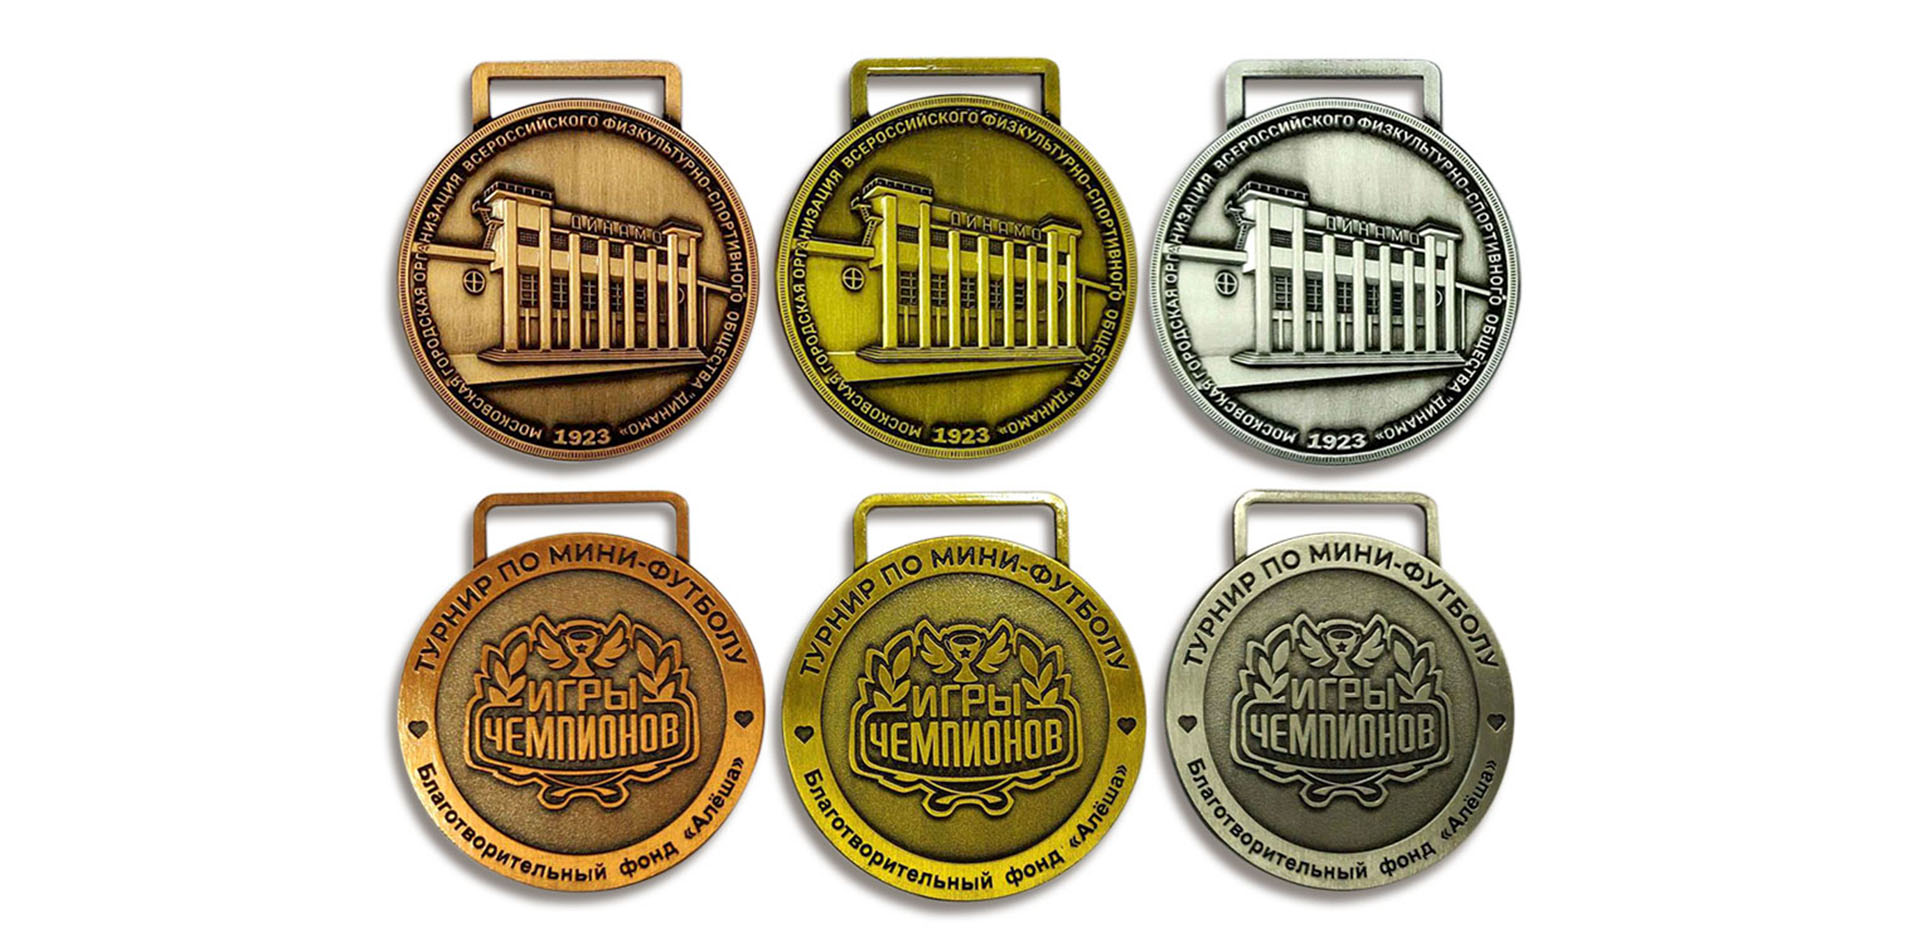 ArtiGifts: Crafting Excellence in Custom Metal Medals